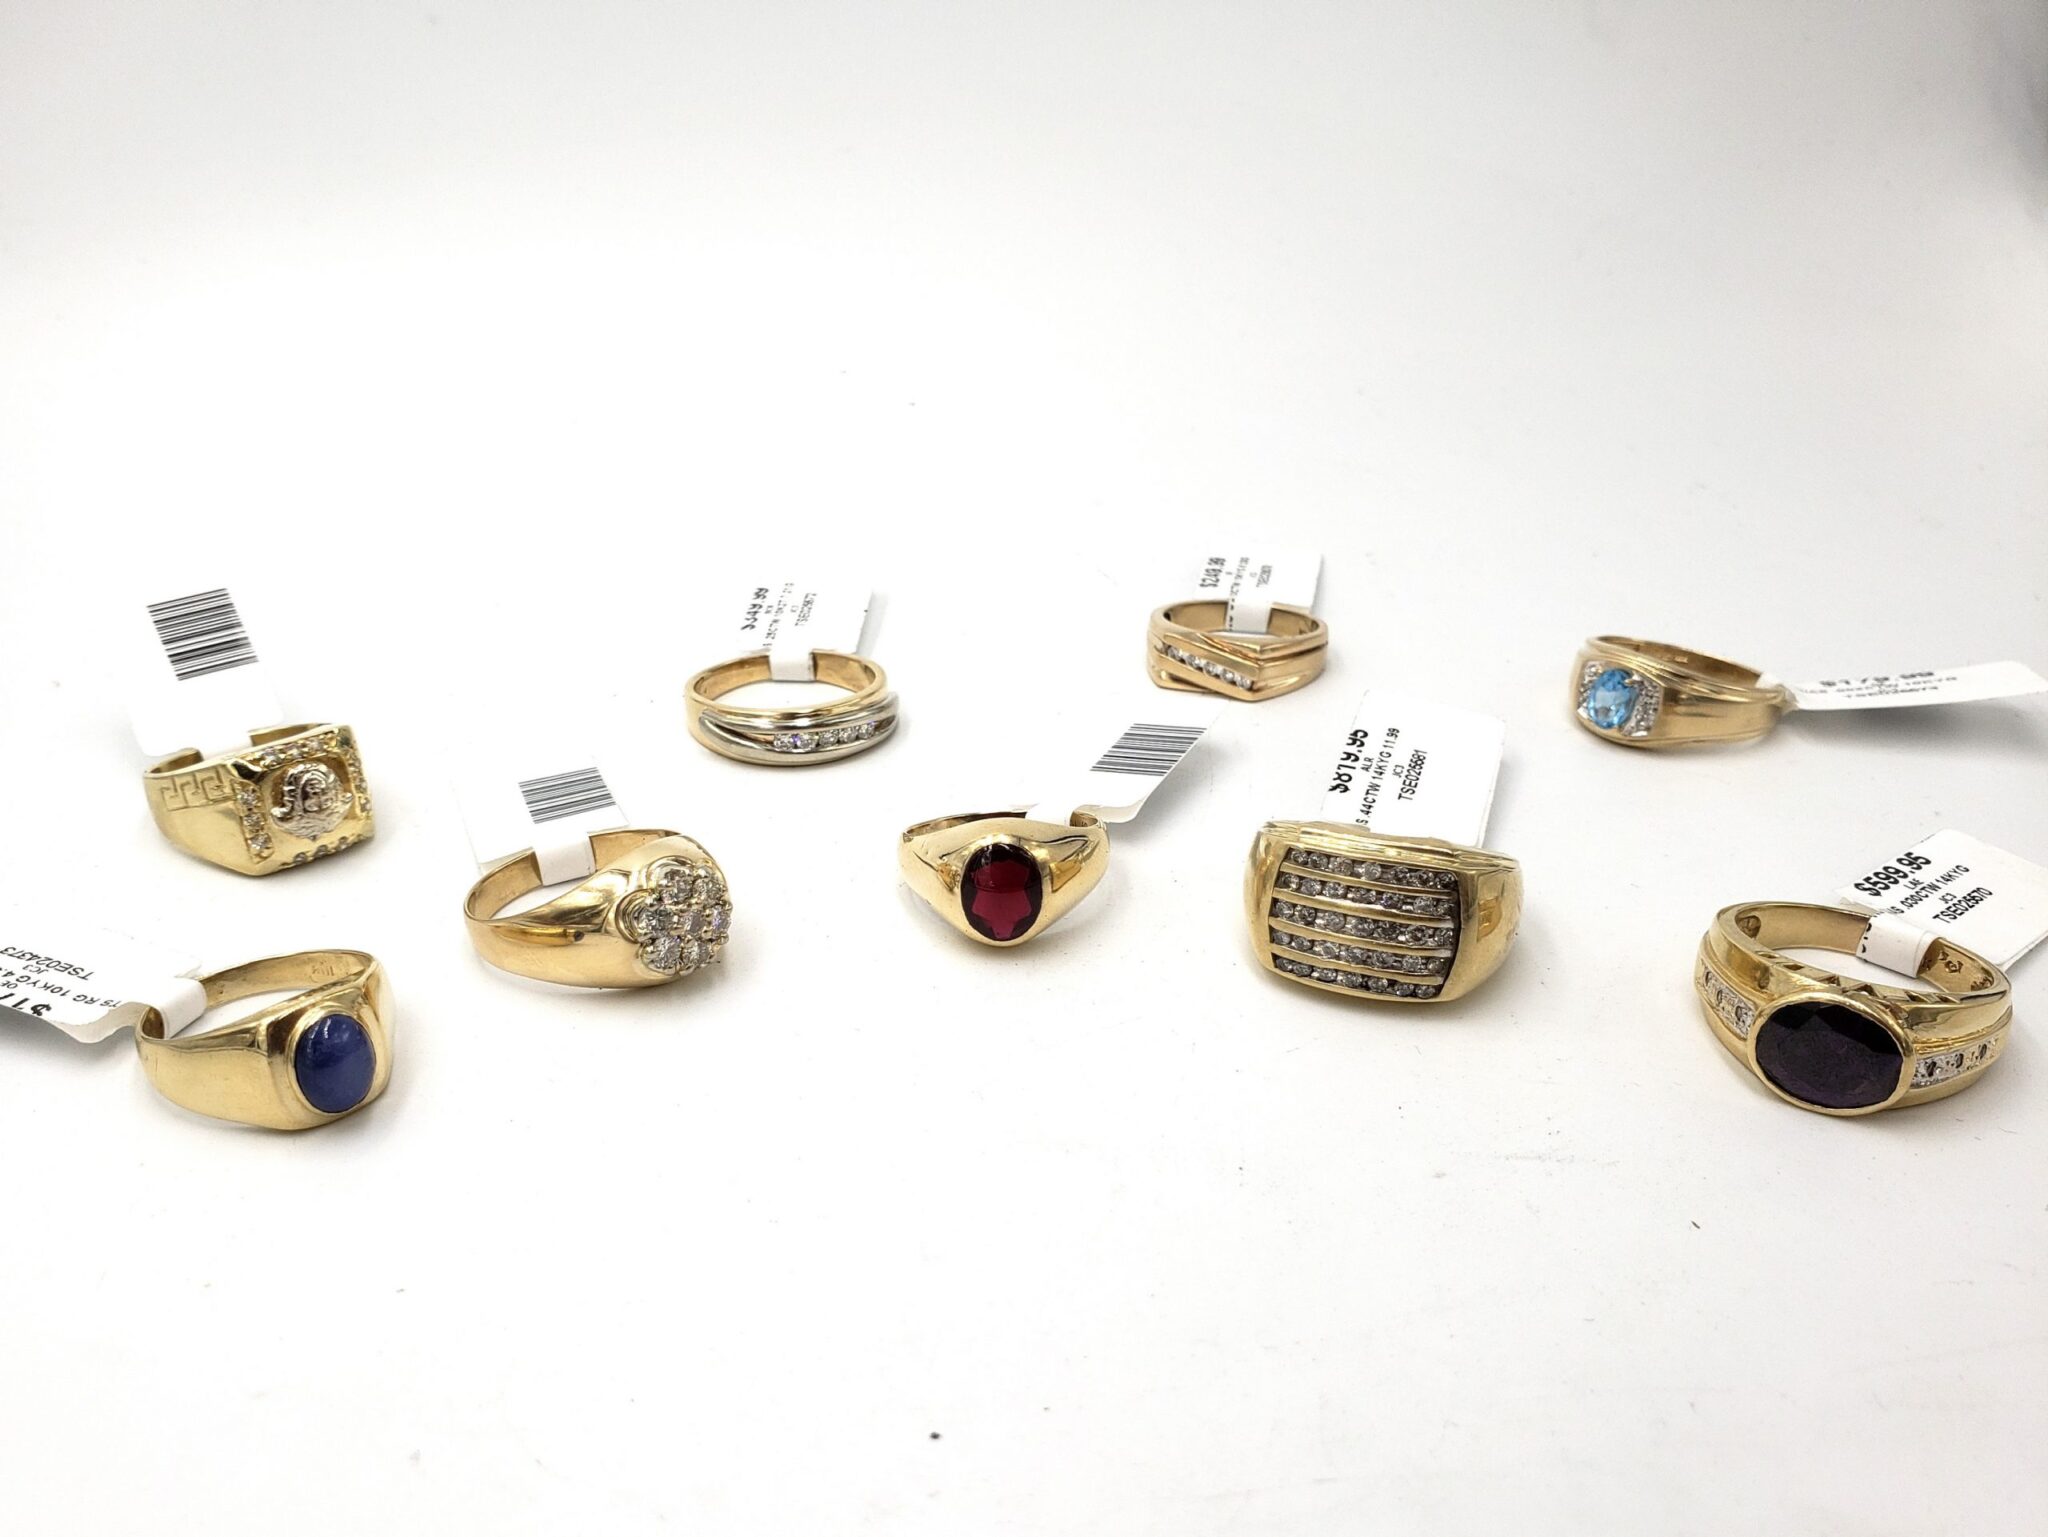 NEW STOCK: Men’s Gold Rings at Evergreen Traders!